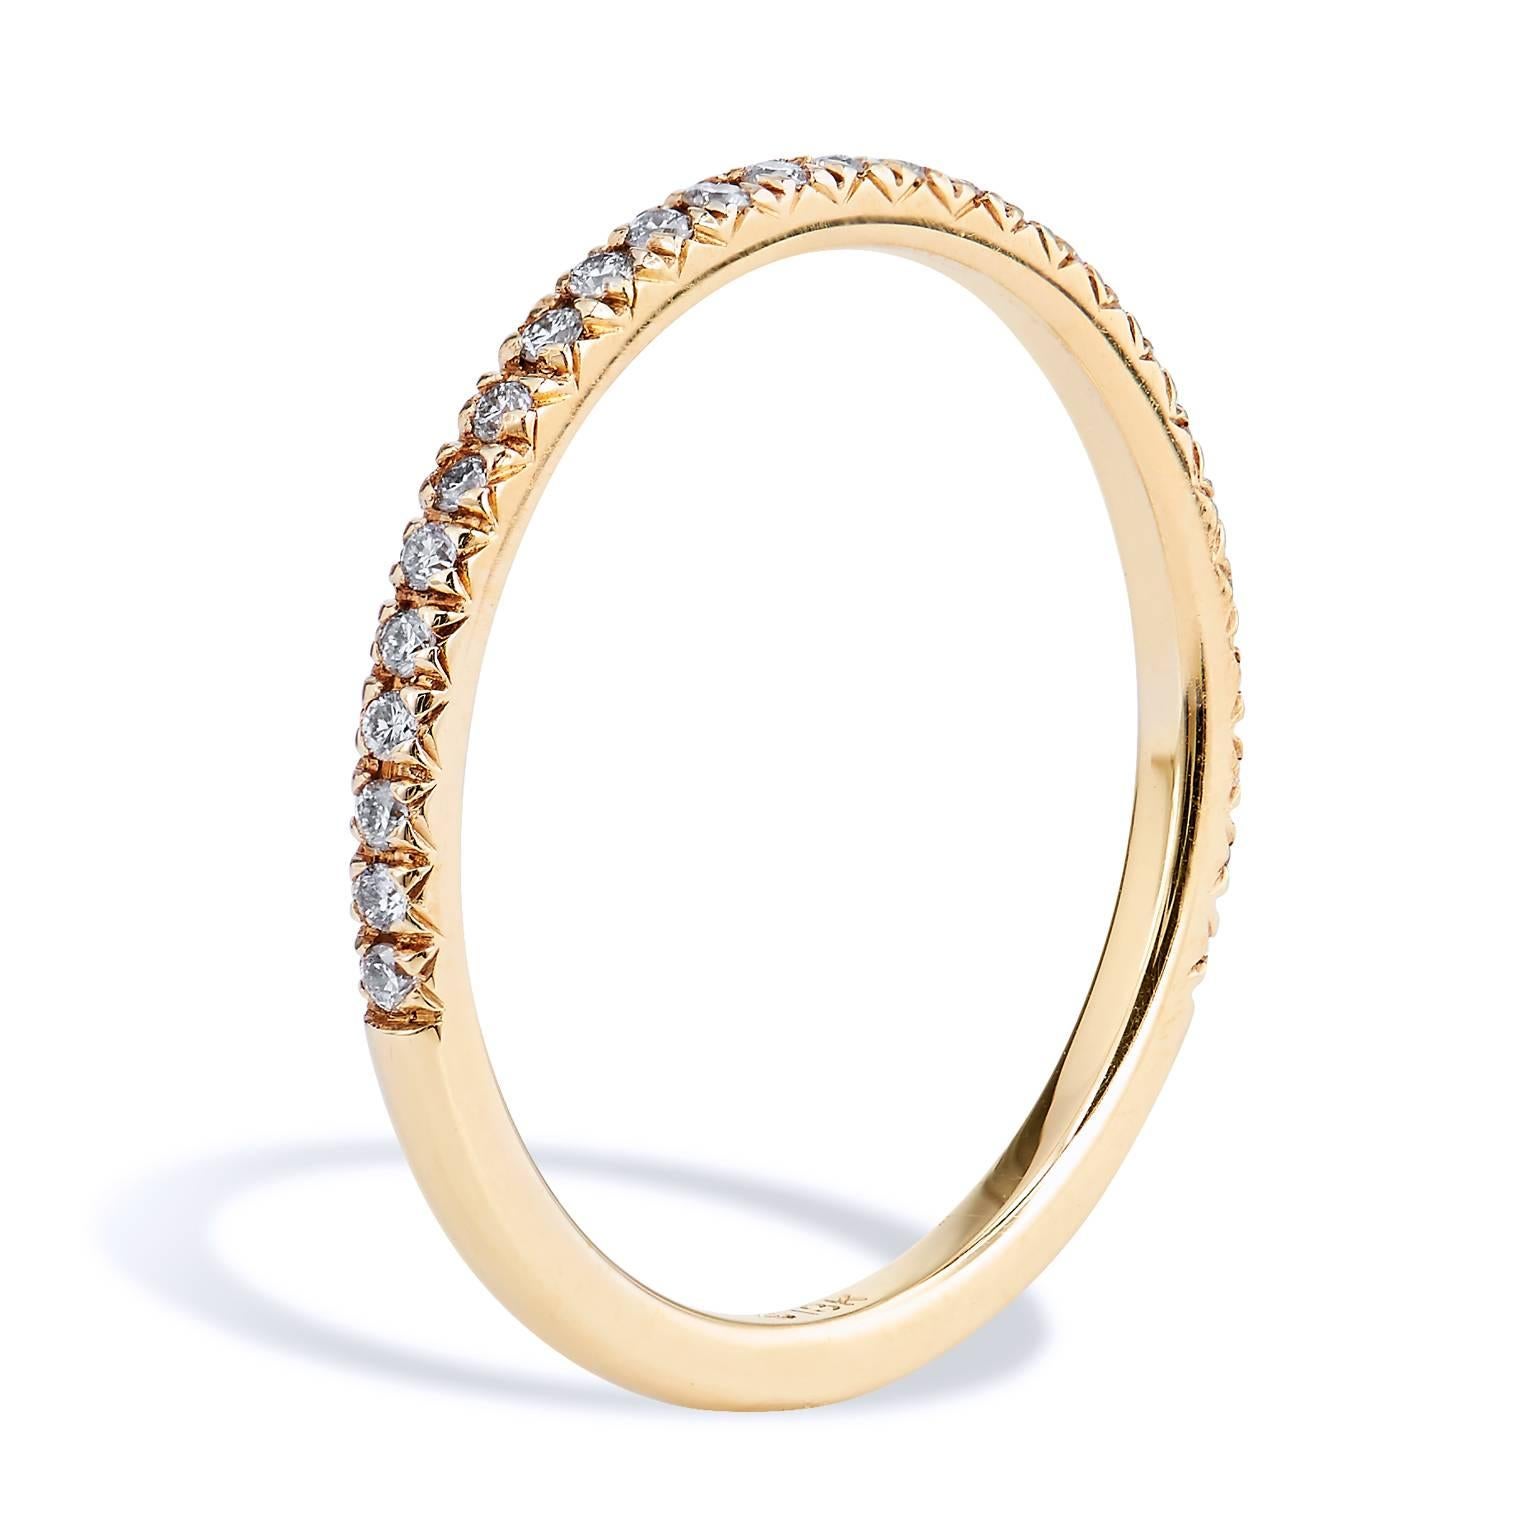 18 Karat Yellow Gold Band Ring with 0.14 Carats Total Weight of Diamonds

This diamond band ring features twenty-seven diamonds that are pave set with a total weight of 0.14 carat (G/H/VS). 
These beautiful diamonds are affixed to a 1.50 mm 18 karat